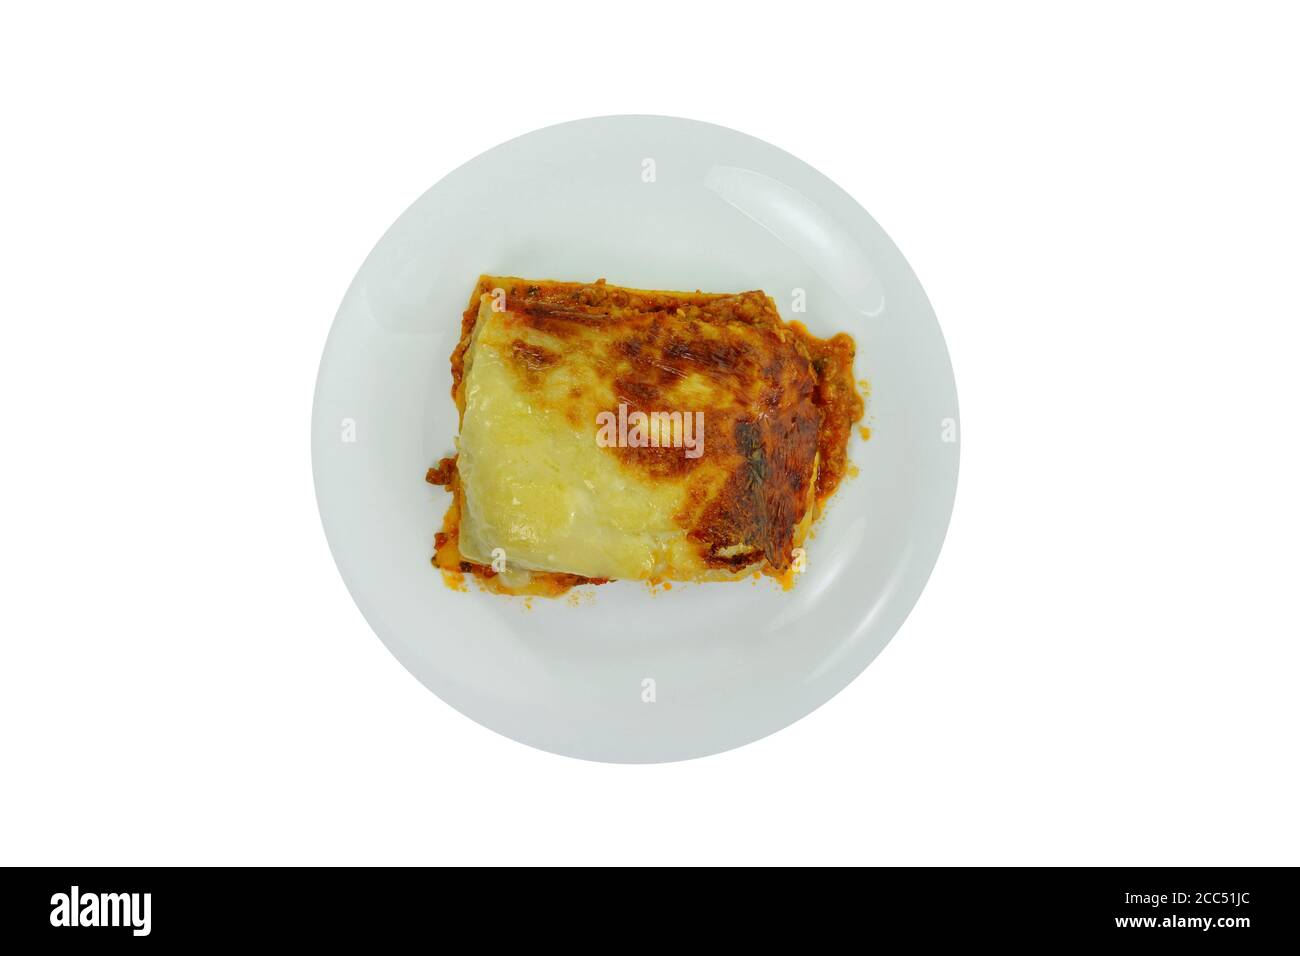 Portion of tasty lasagna. An isolated traditional lasagna made with minced beef bolognaise sauce. Tasty serving of traditional Italian lasagne with sp Stock Photo